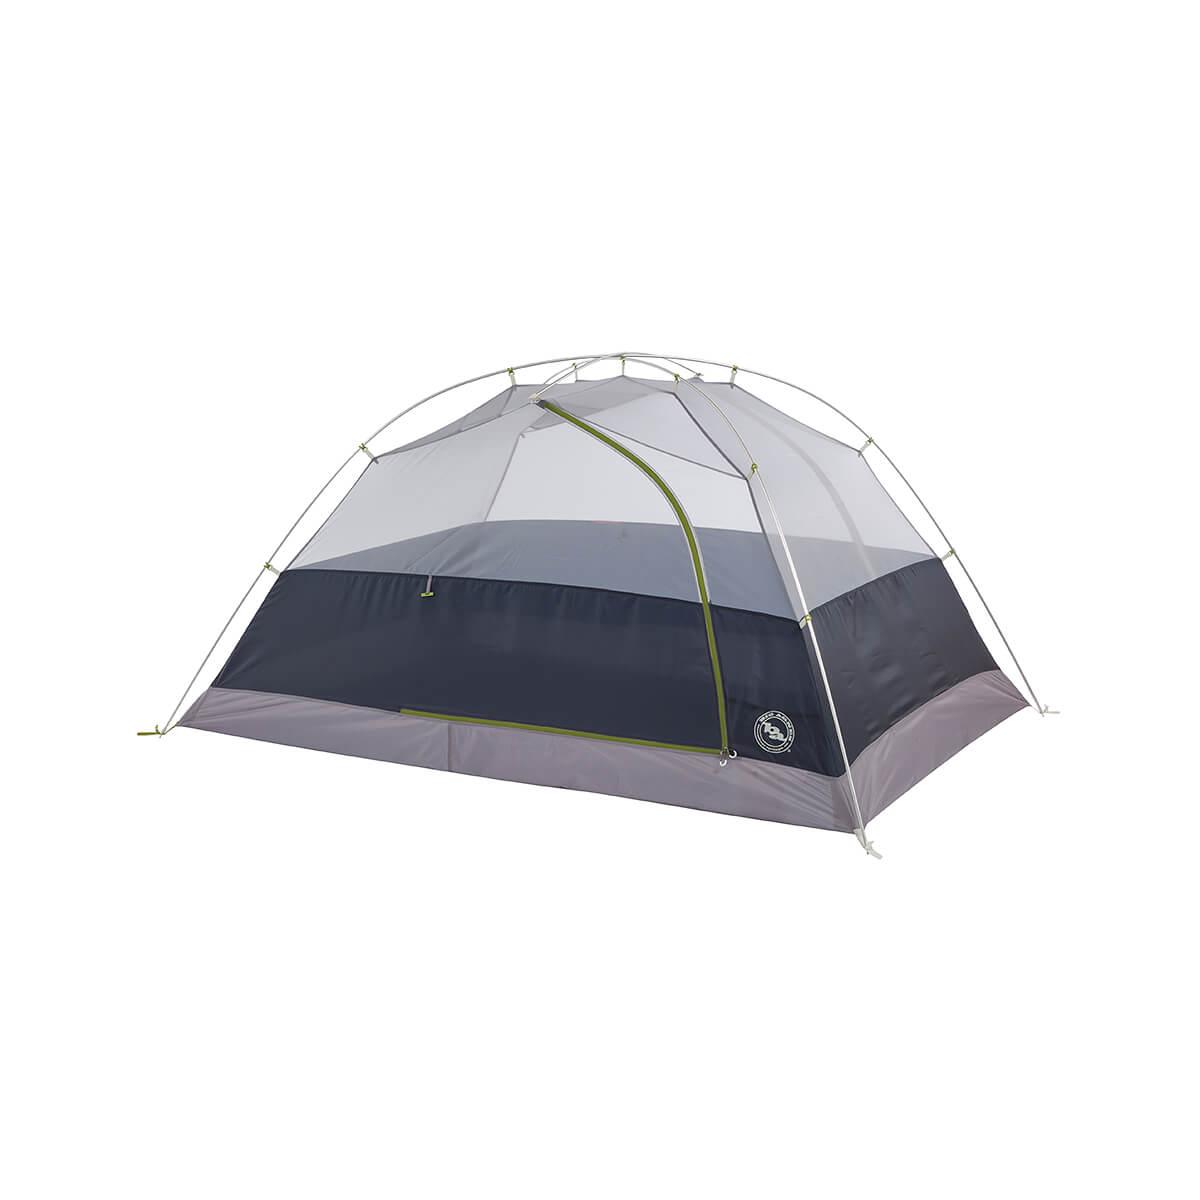  Blacktail Tent - 3- Person